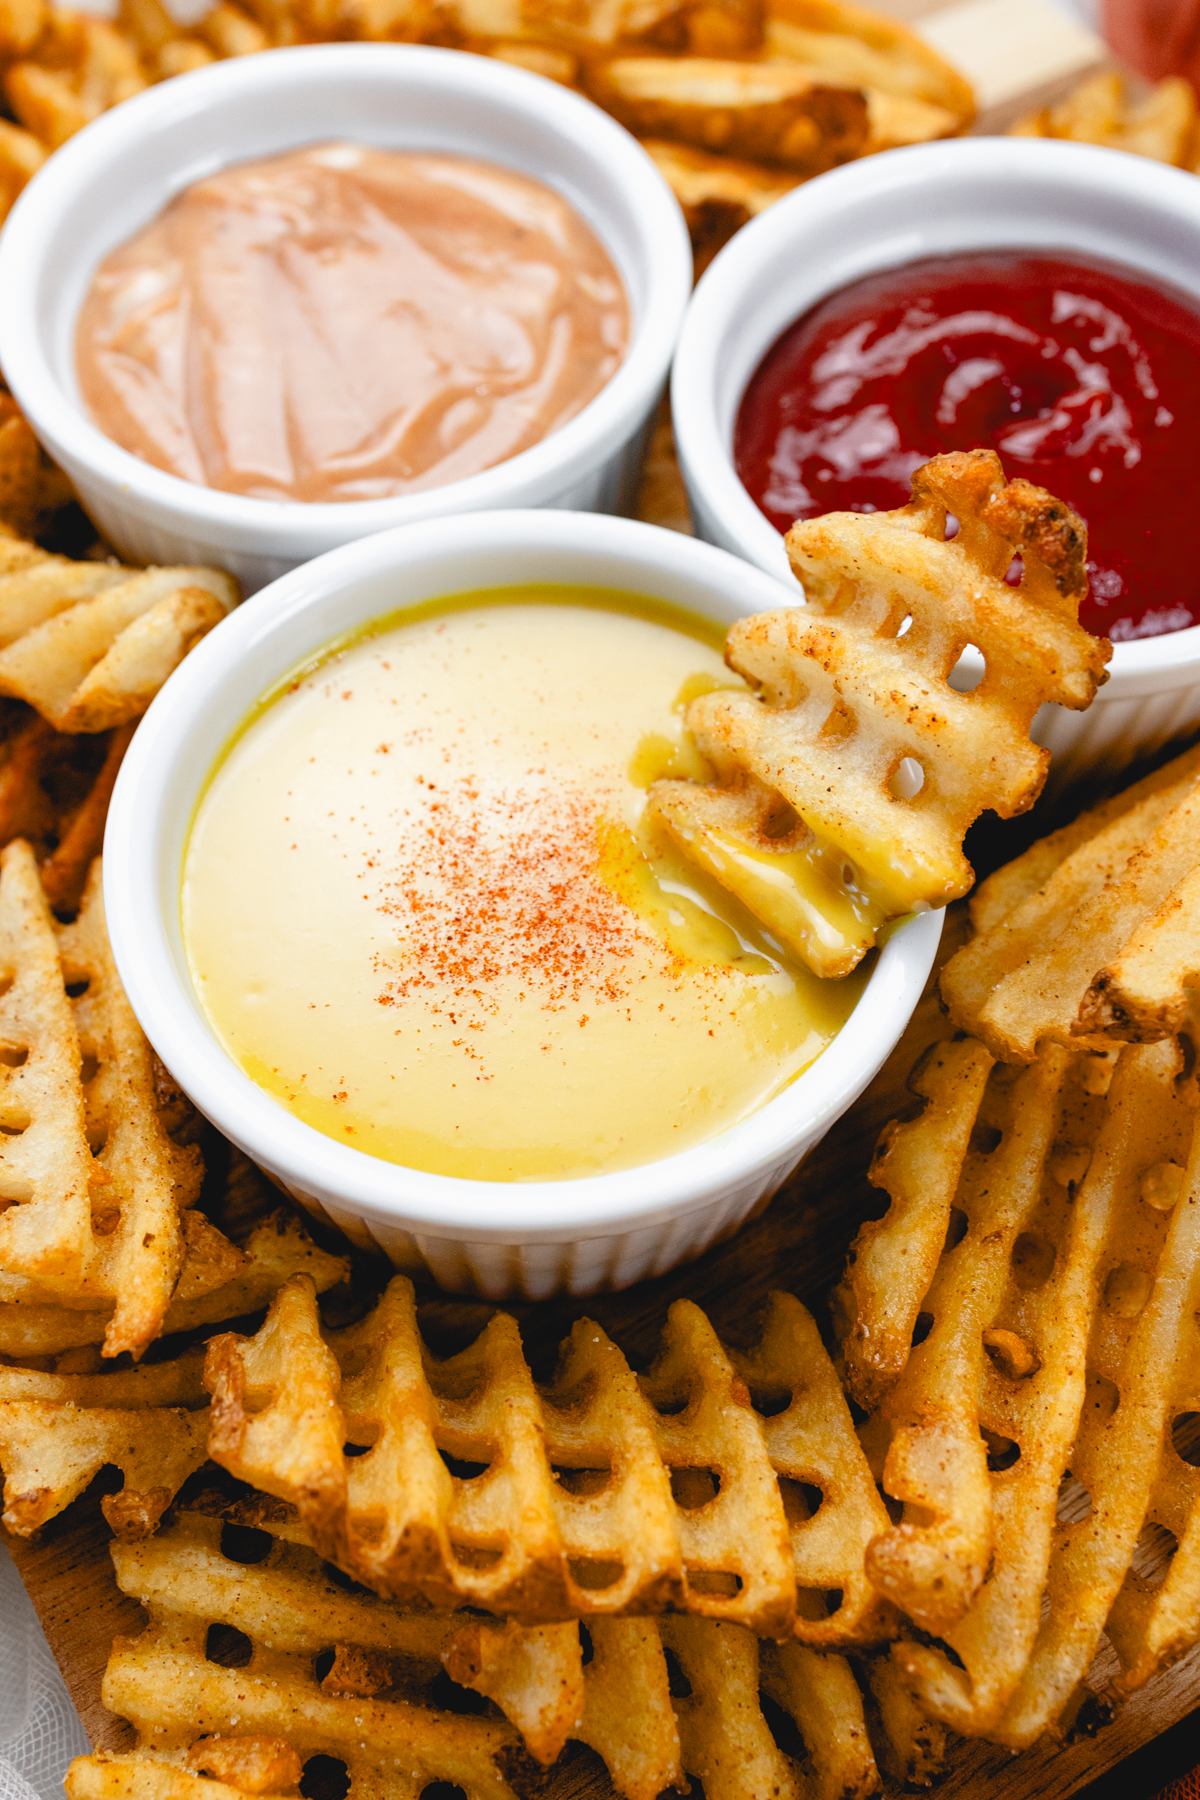 Top view of honey mustard dipping sauce in a small ramekin, next to two other dips, surrounded by waffle fries.